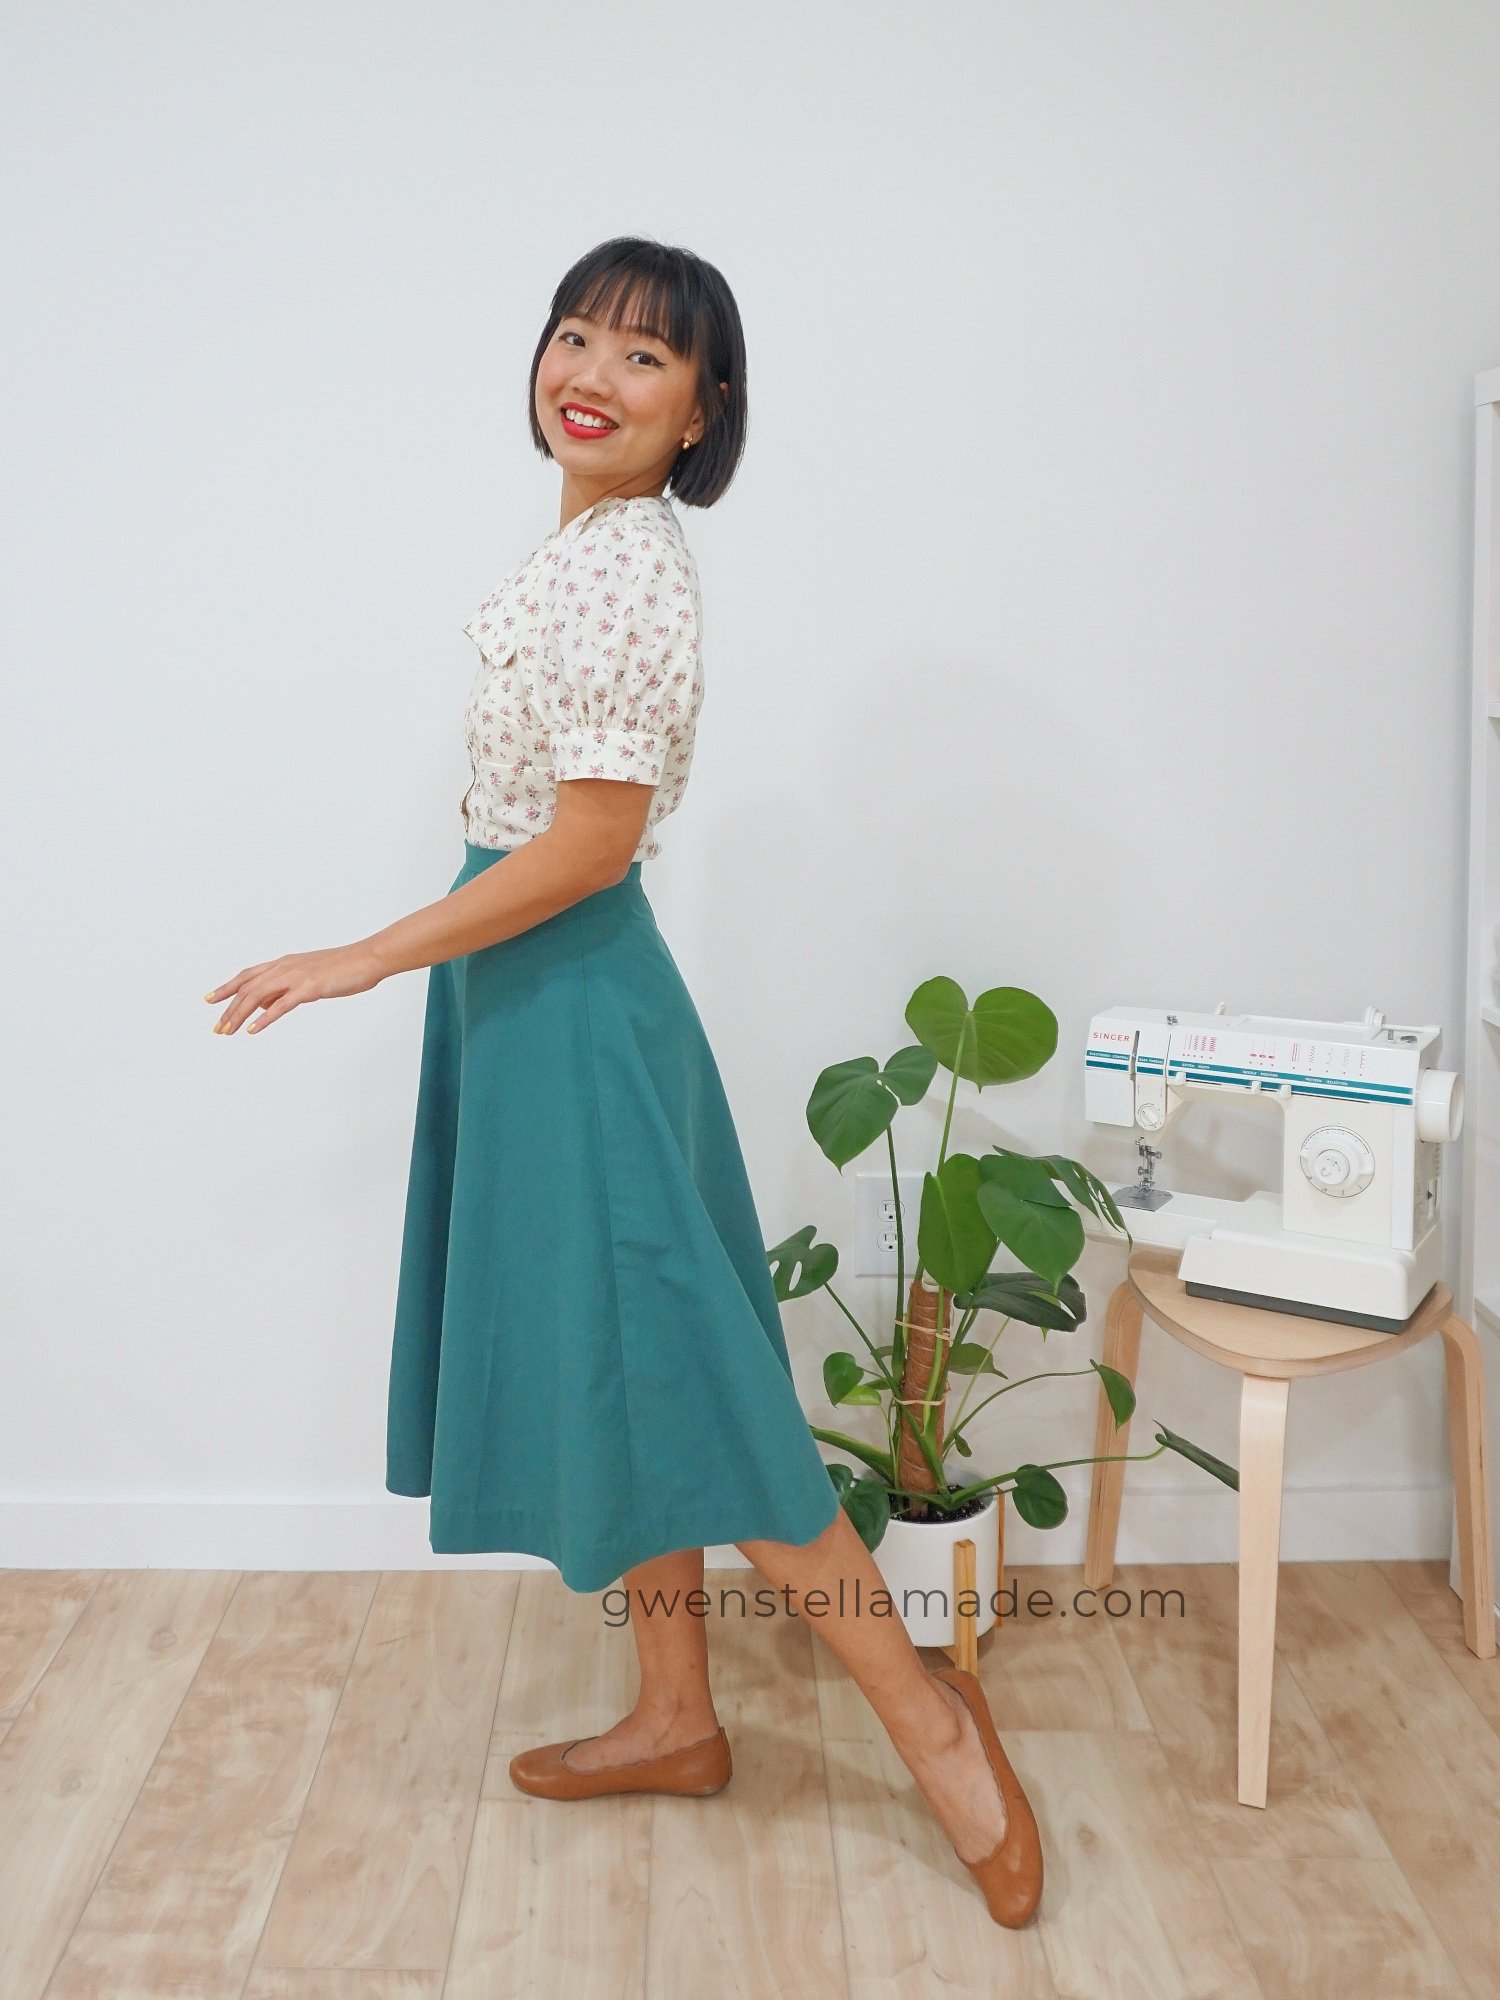 How to Draft and Sew a Half Circle Skirt (4 panels) — Gwenstella Made